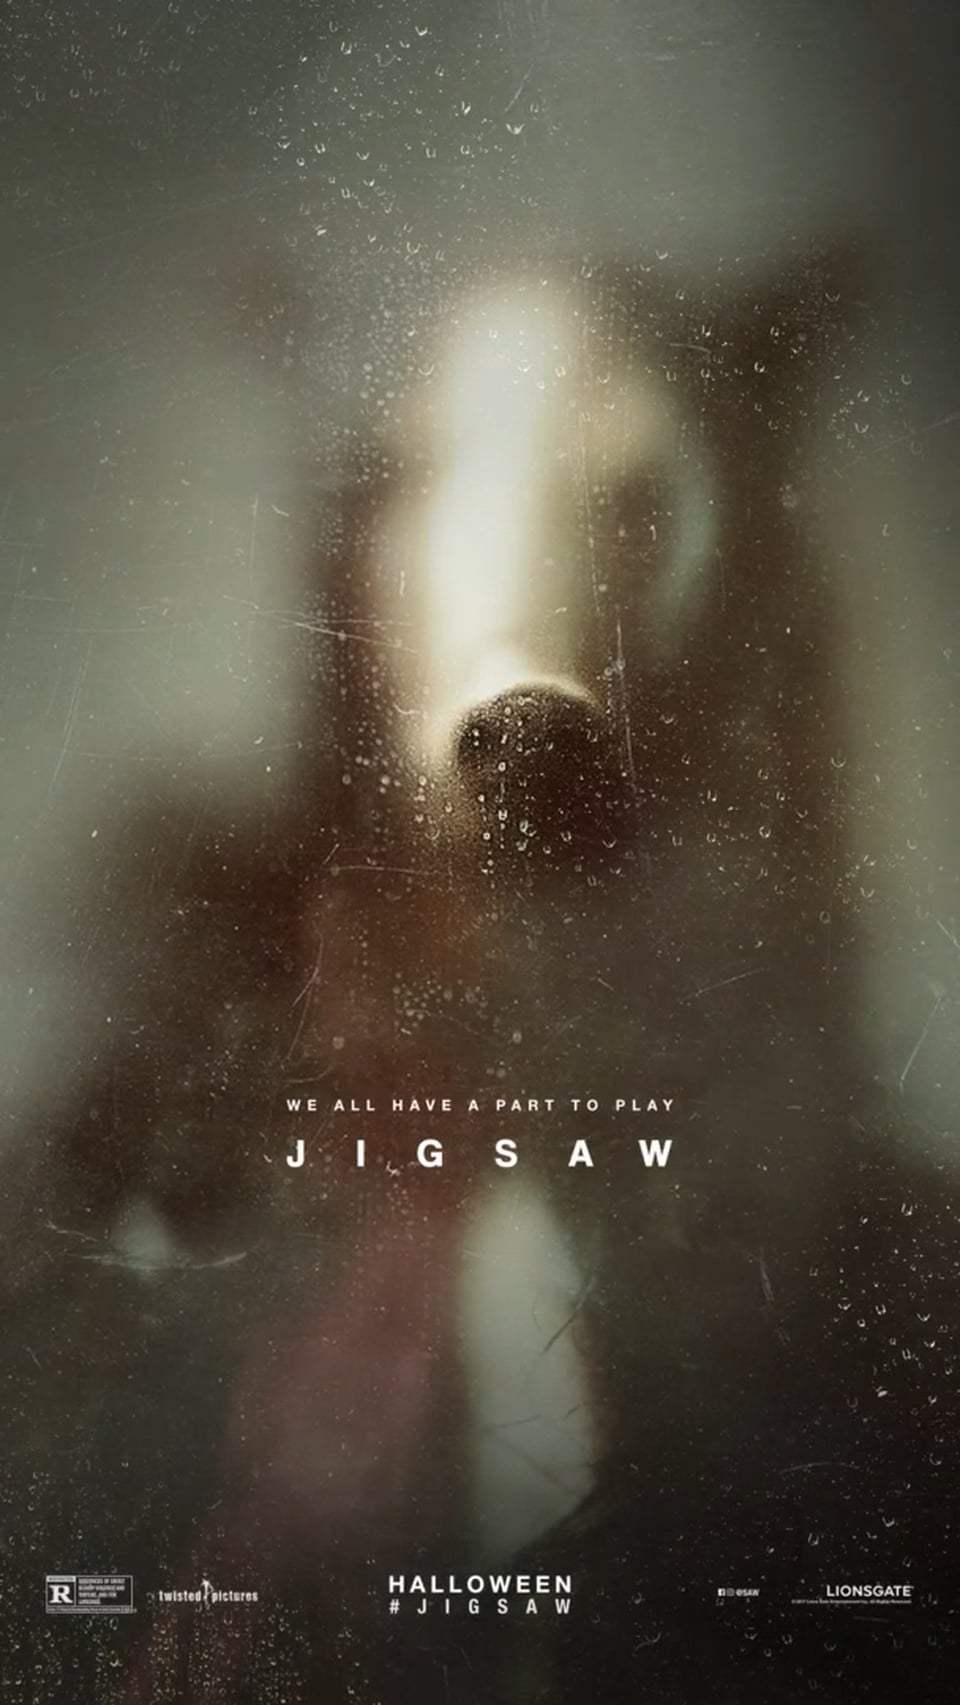 Jigsaw: We All Have a Part to Play